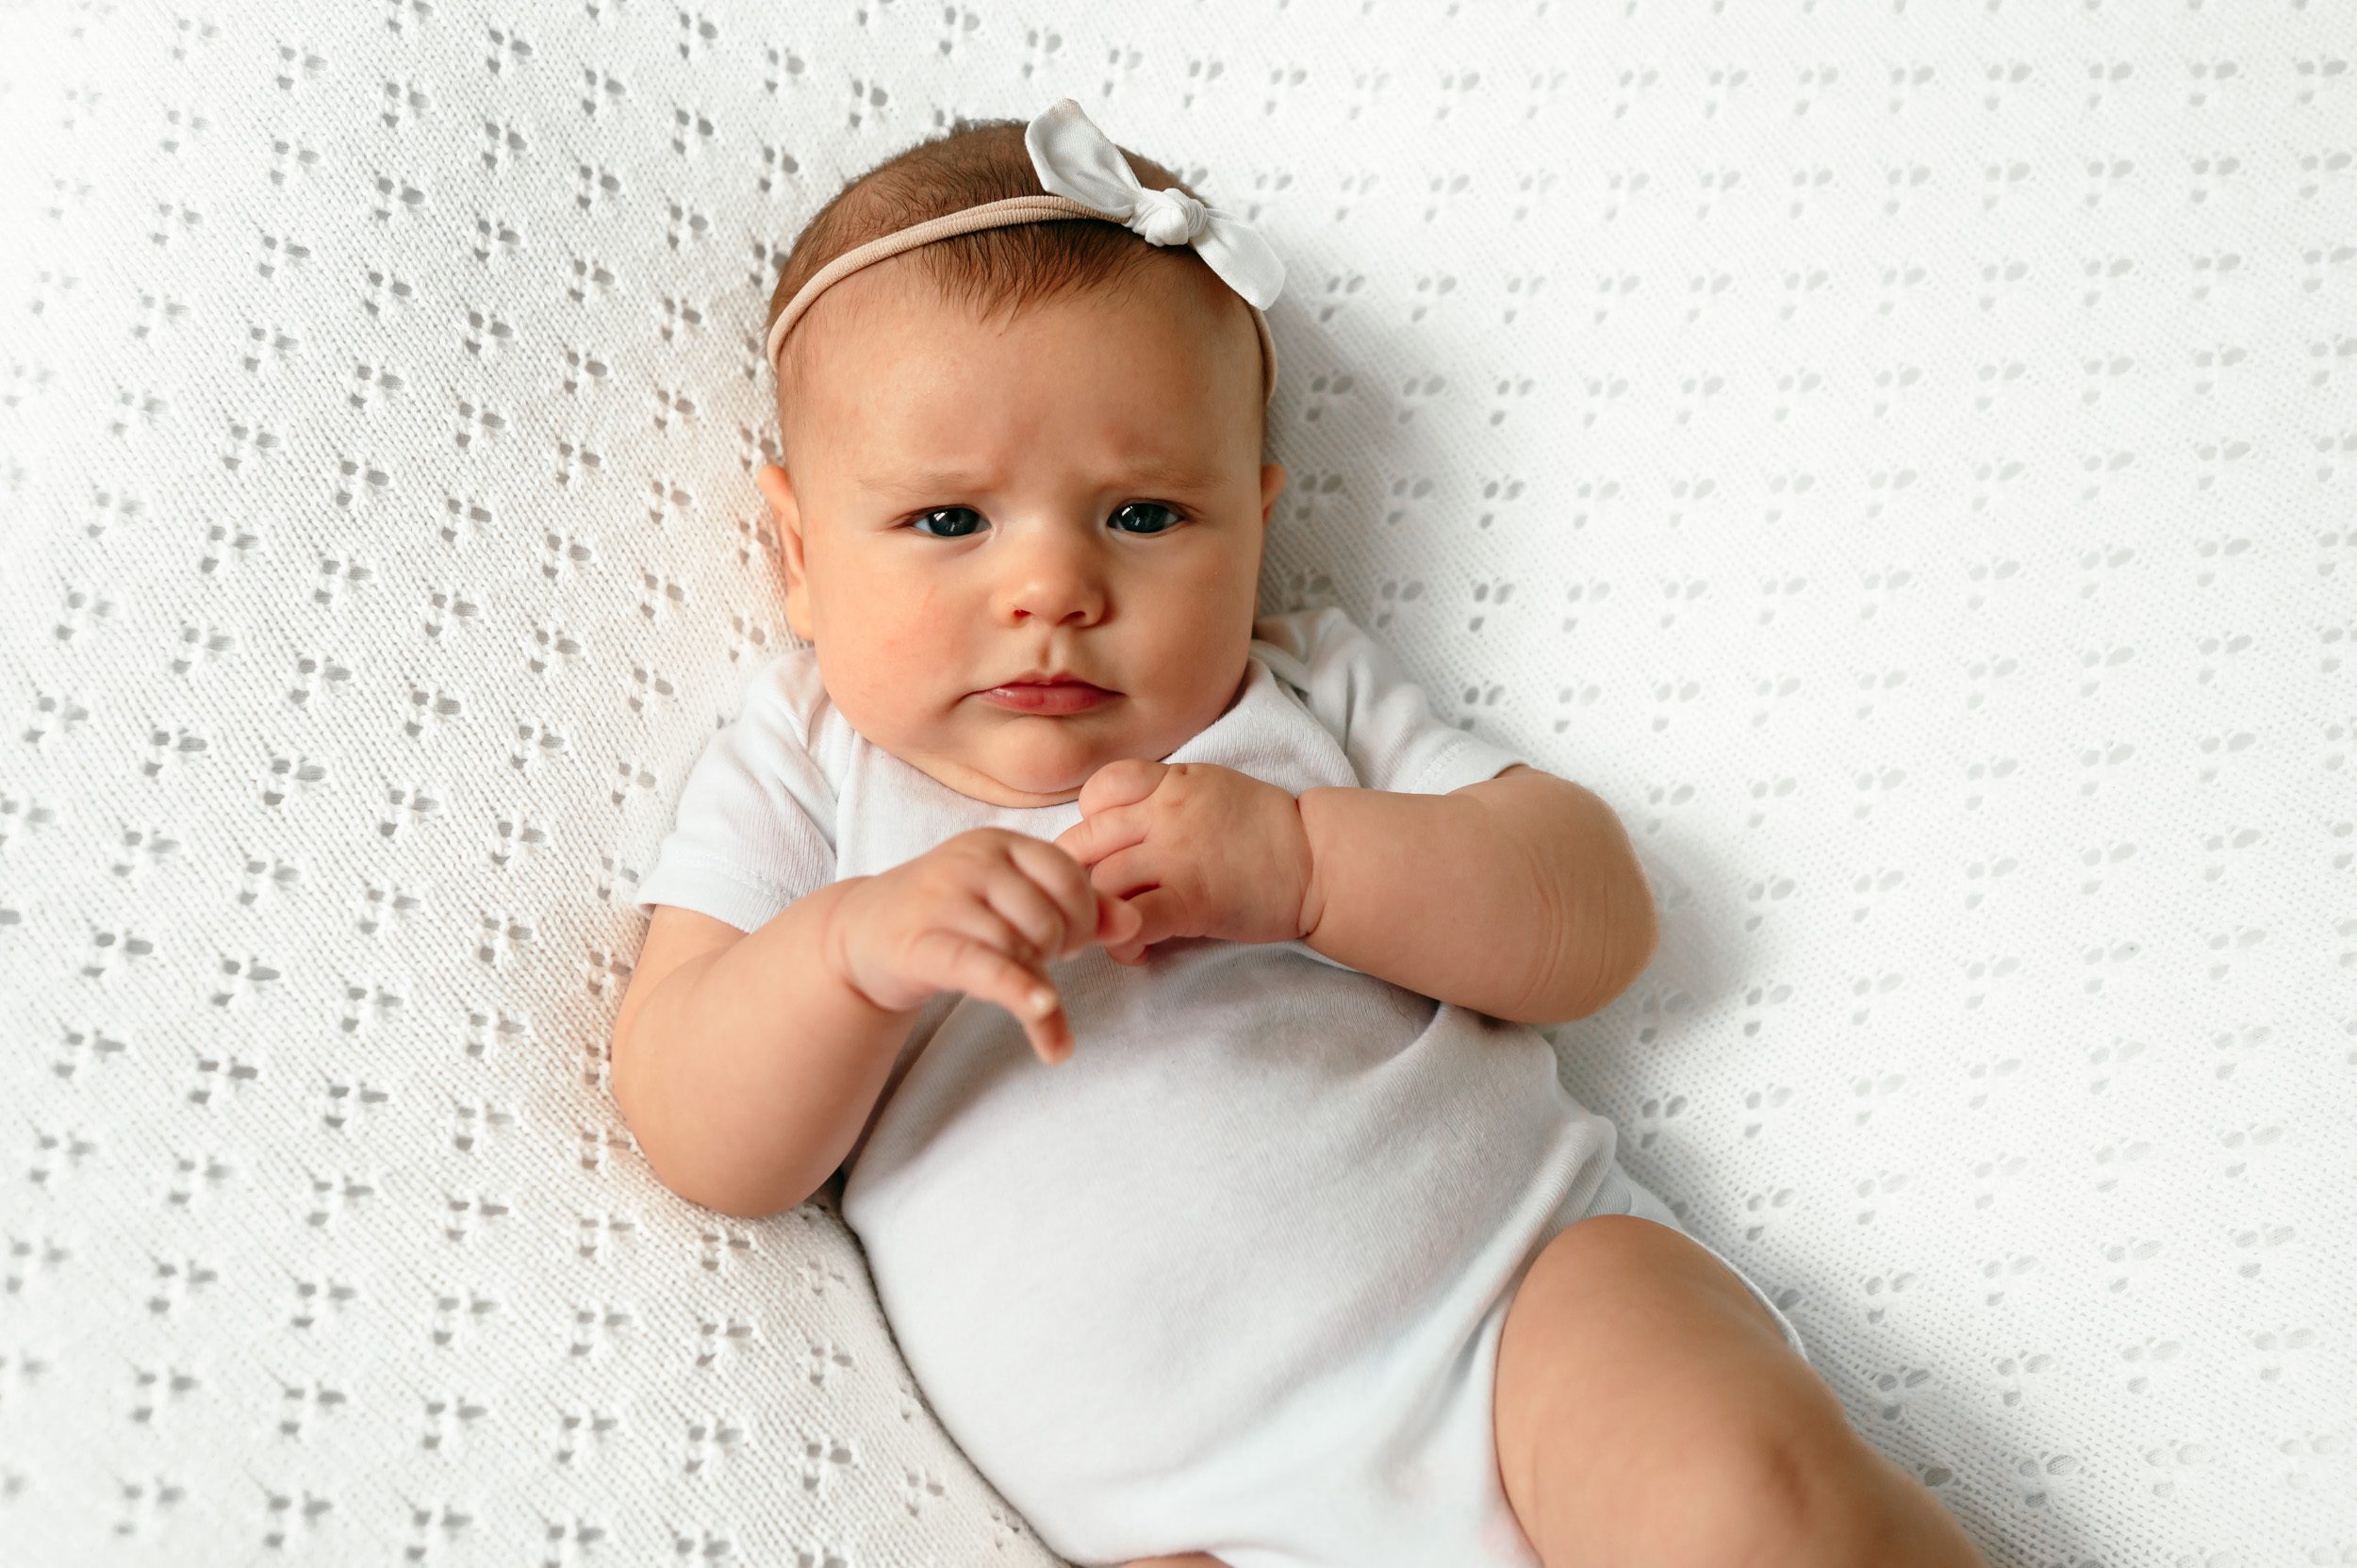 A baby girl in a white onesie on a white textured backdrop looking up at the camera with a concerned look on her face during a home newborn photoshoot